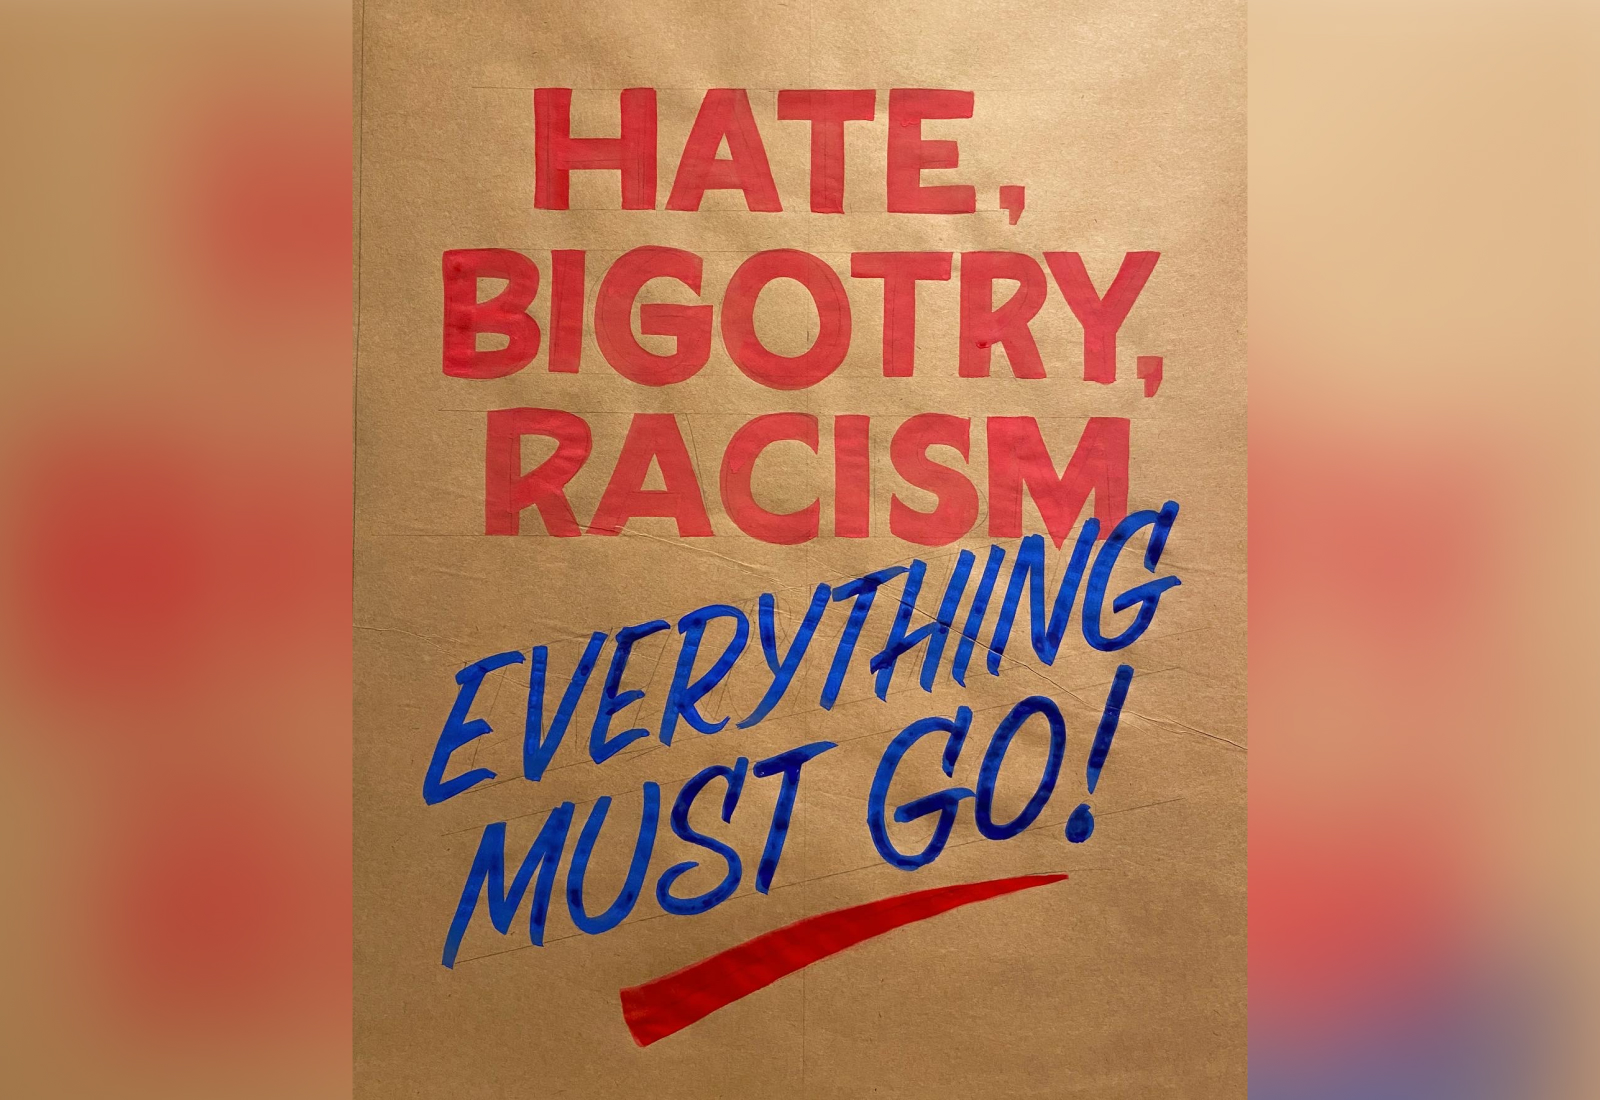 Hate, Bigotry, Racism: Everything Must Go! | Hand Painted Sign by Joey Carty